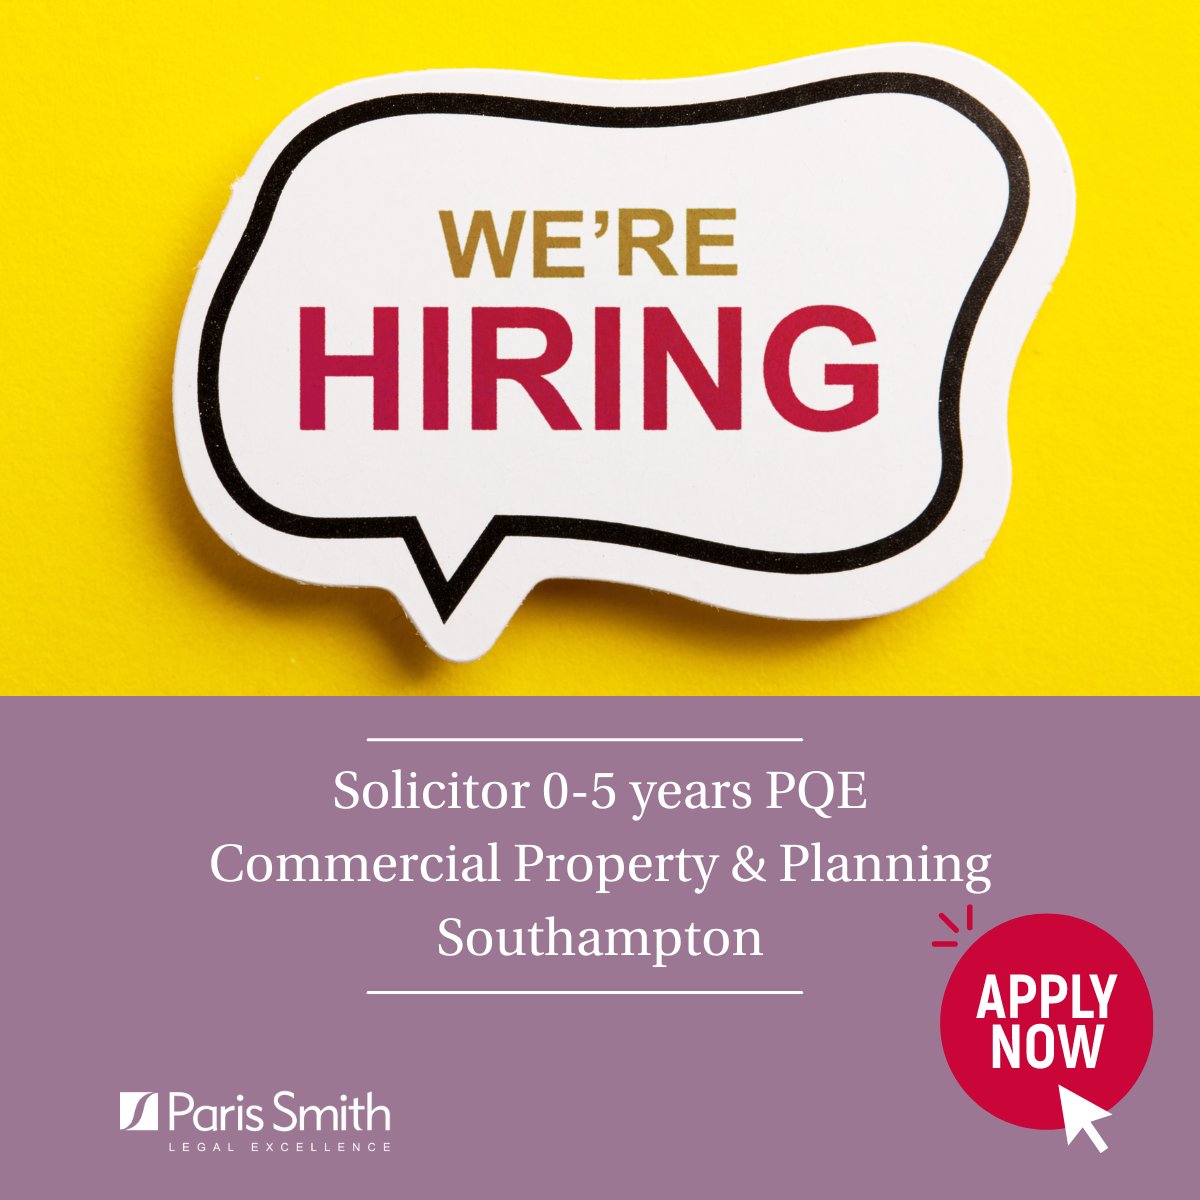 We are looking for a talented solicitor (0-5yr PQE) for our property team. Manage caseload and deliver excellence across property matters for institutions & businesses.

Apply now: parissmith.co.uk/career/commerc…  

#hiring #southamptonjobs